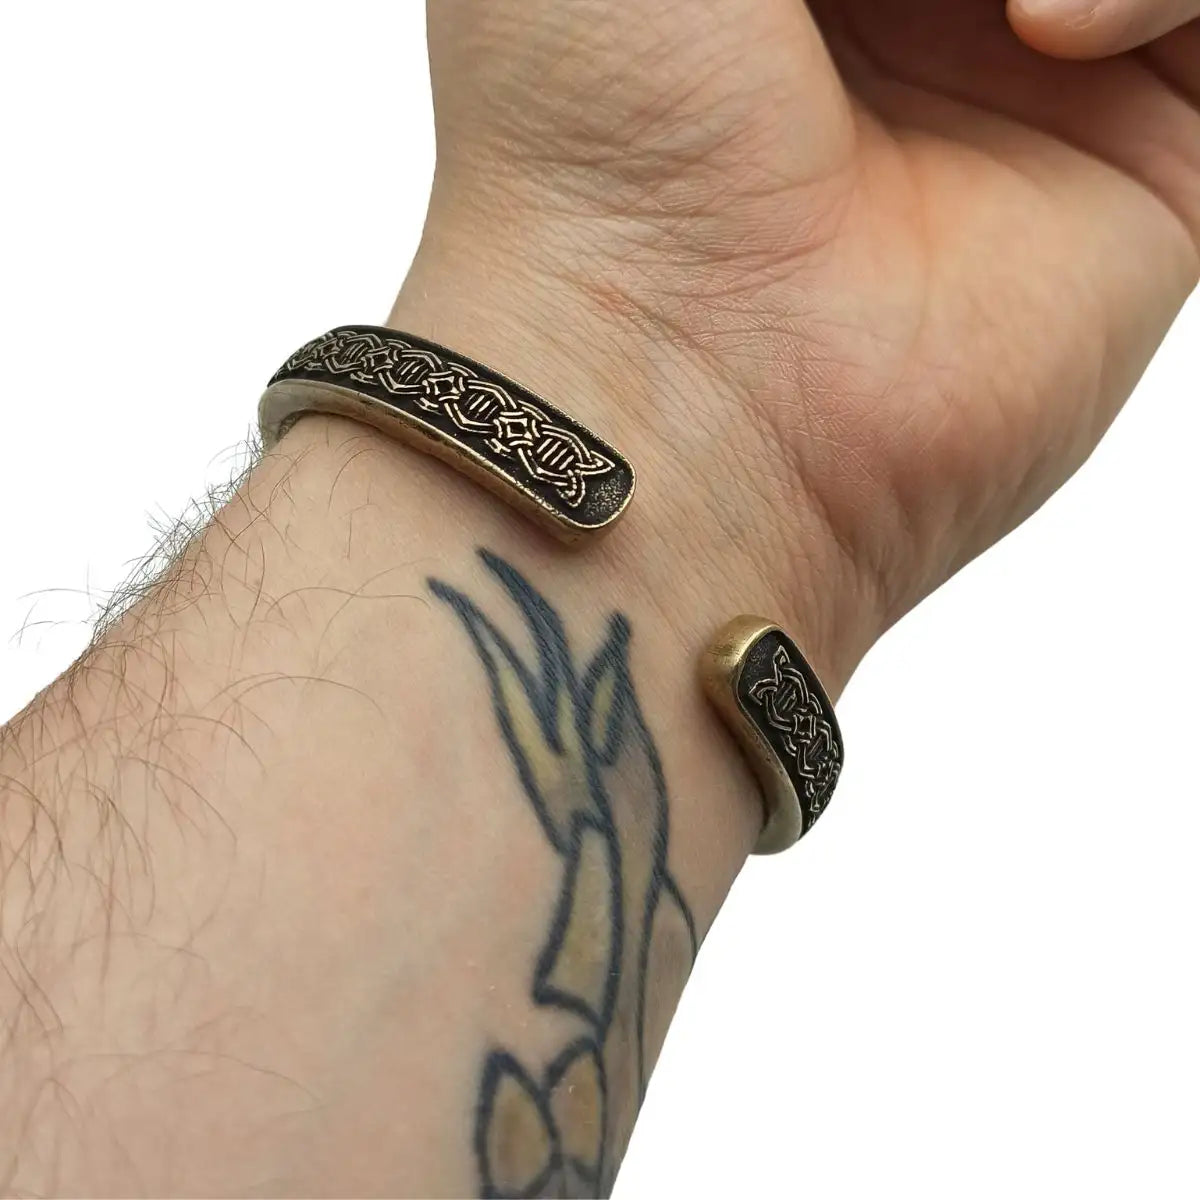 An armband tattoo is a type of tattoo design that encircles the upper arm  like a band. It can be placed either around the bicep or forear... |  Instagram